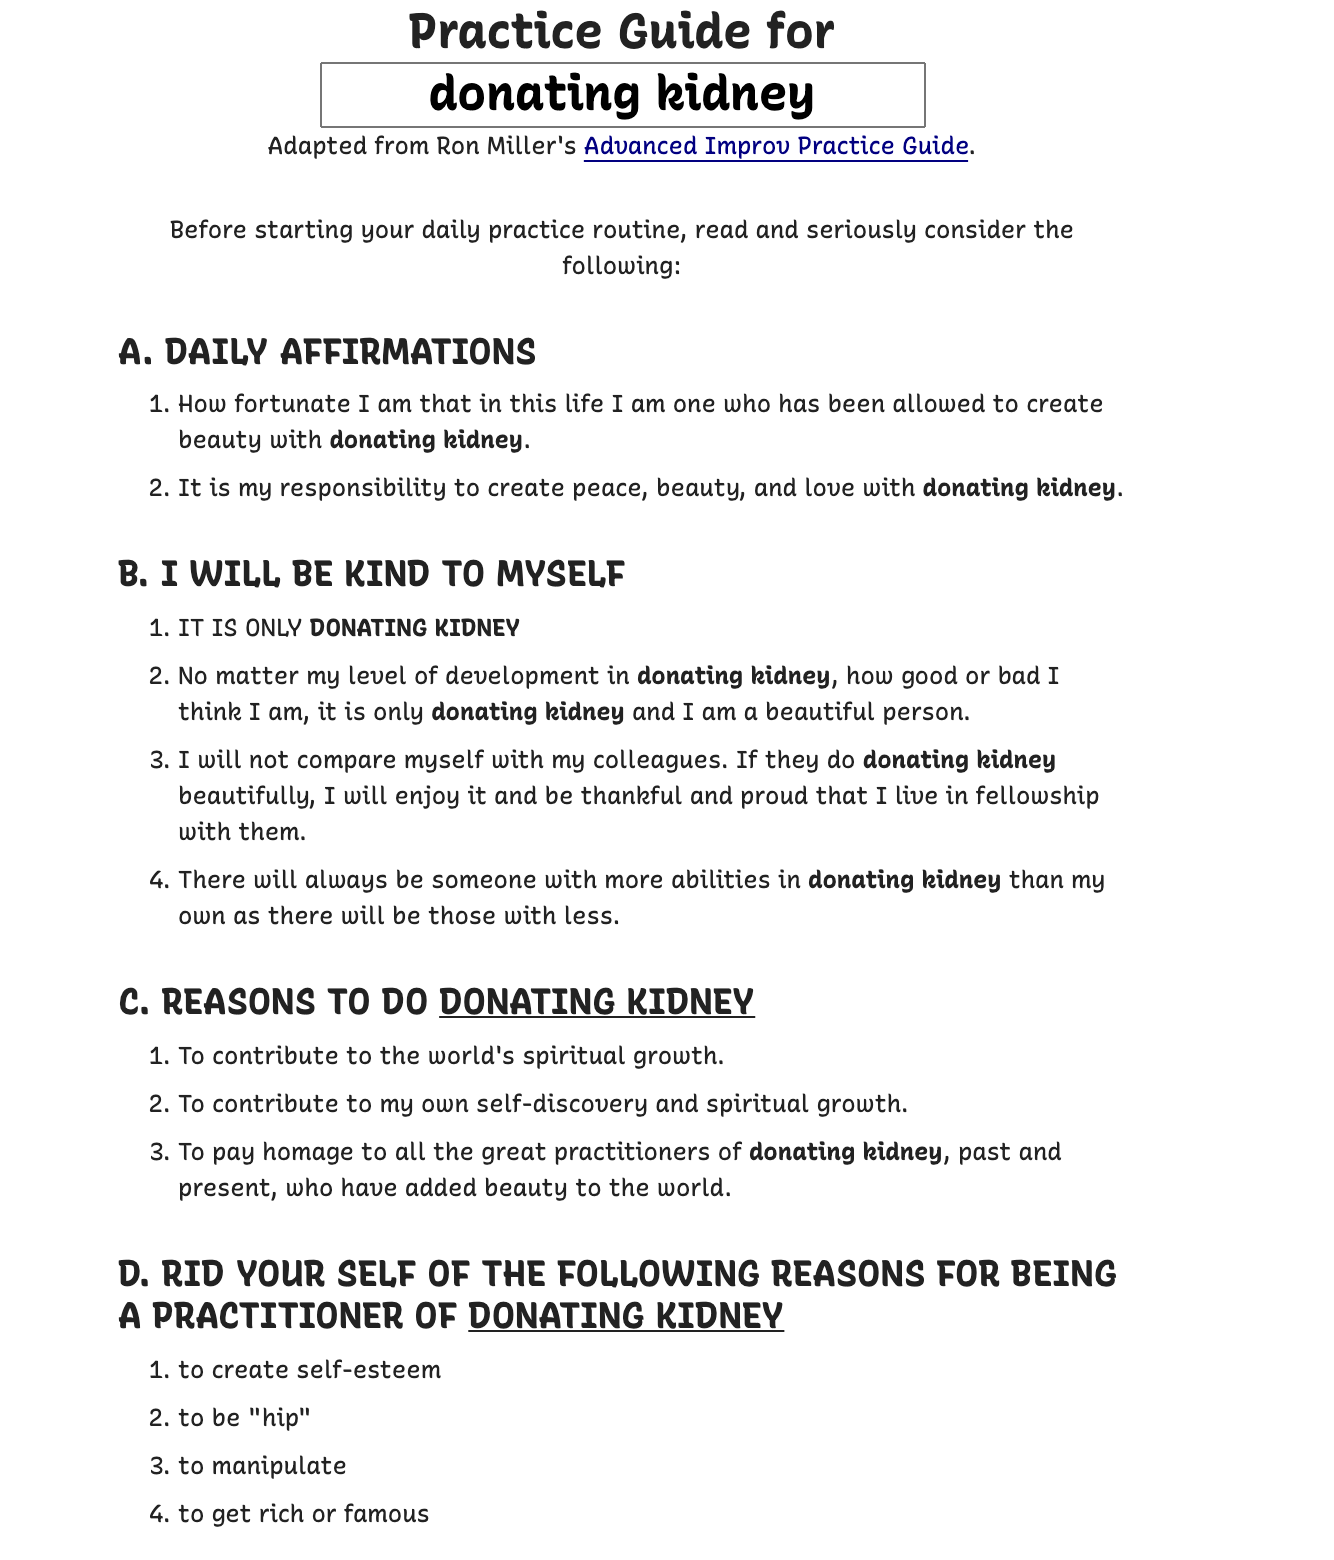 A screenshot of the Practice Guide for donating kidney. It's long, hit the link in the caption for the full text.